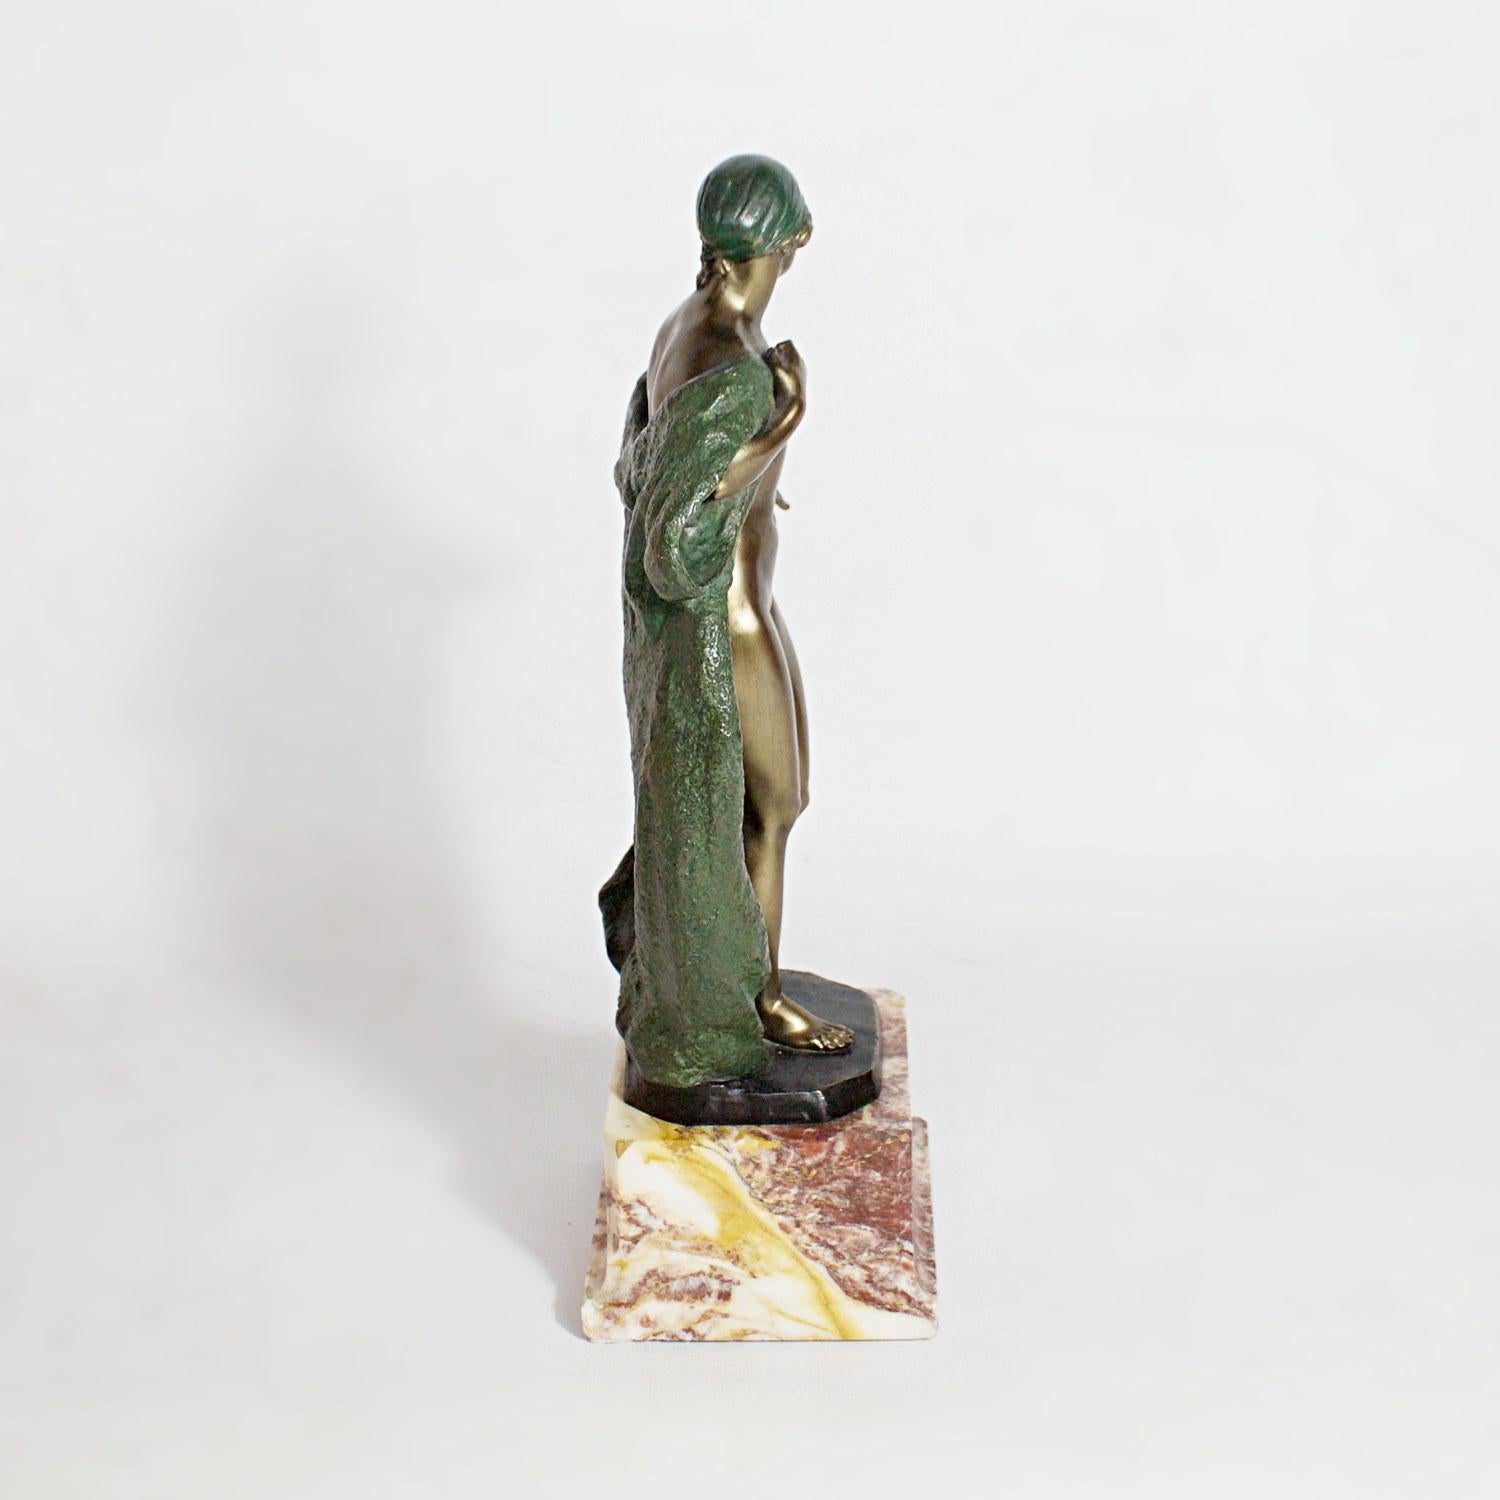 Early 20th Century Art Deco Bronze Sculpture by Joé Descomps, French, circa 1925 For Sale